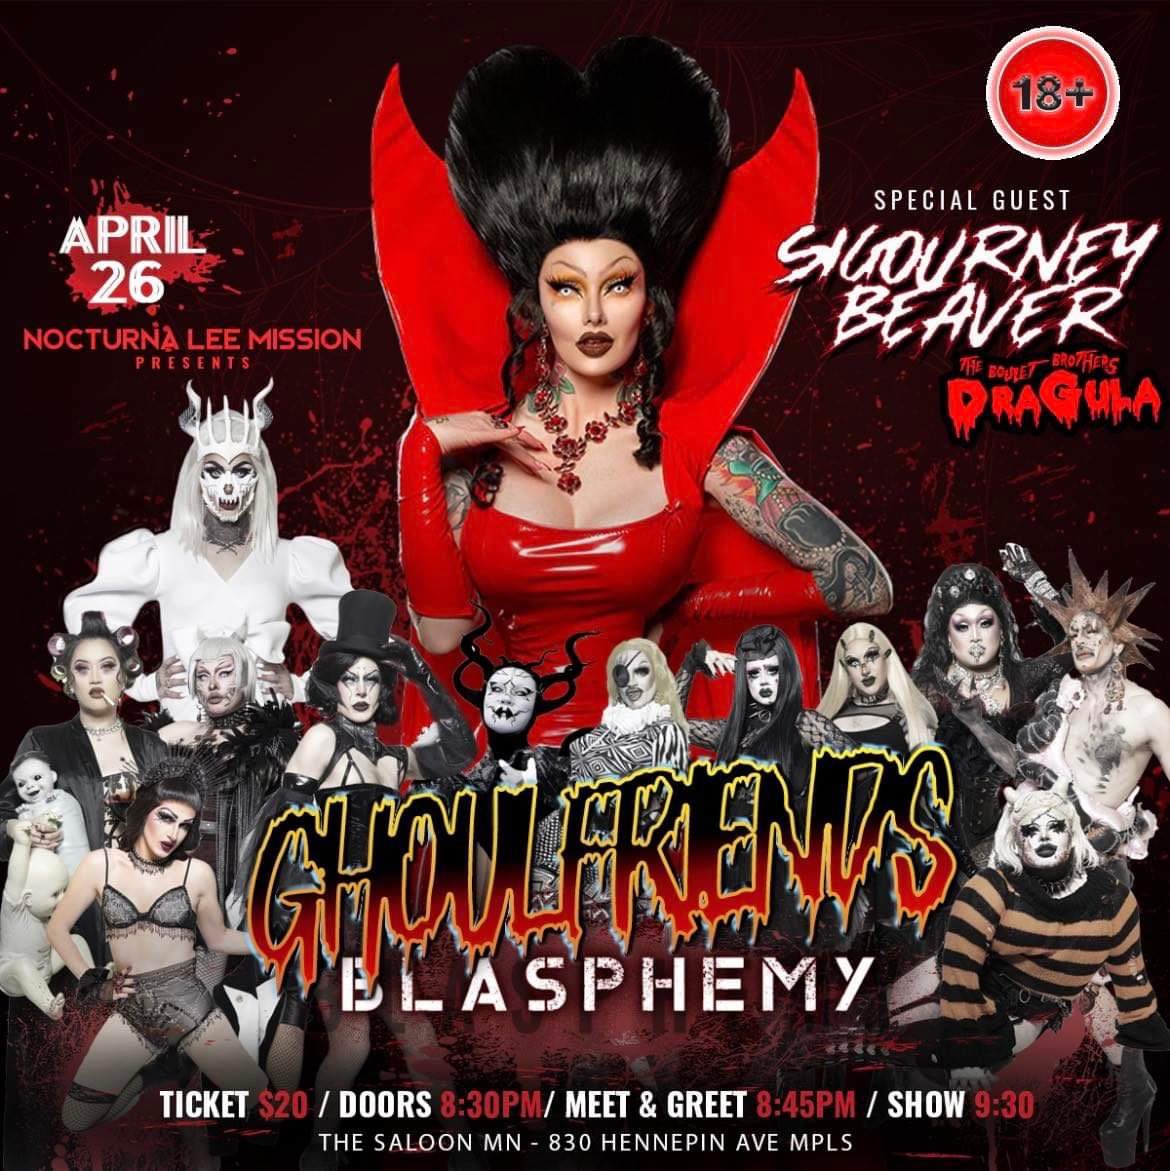 Minneapolis COME BE BEST GHOULFRIENDS WITH US THIS WEDNESDAY w/ Sigourney beaver
#drag #dragula #mndrag #localdrag #supportlocaldrag #twincitiesdrag